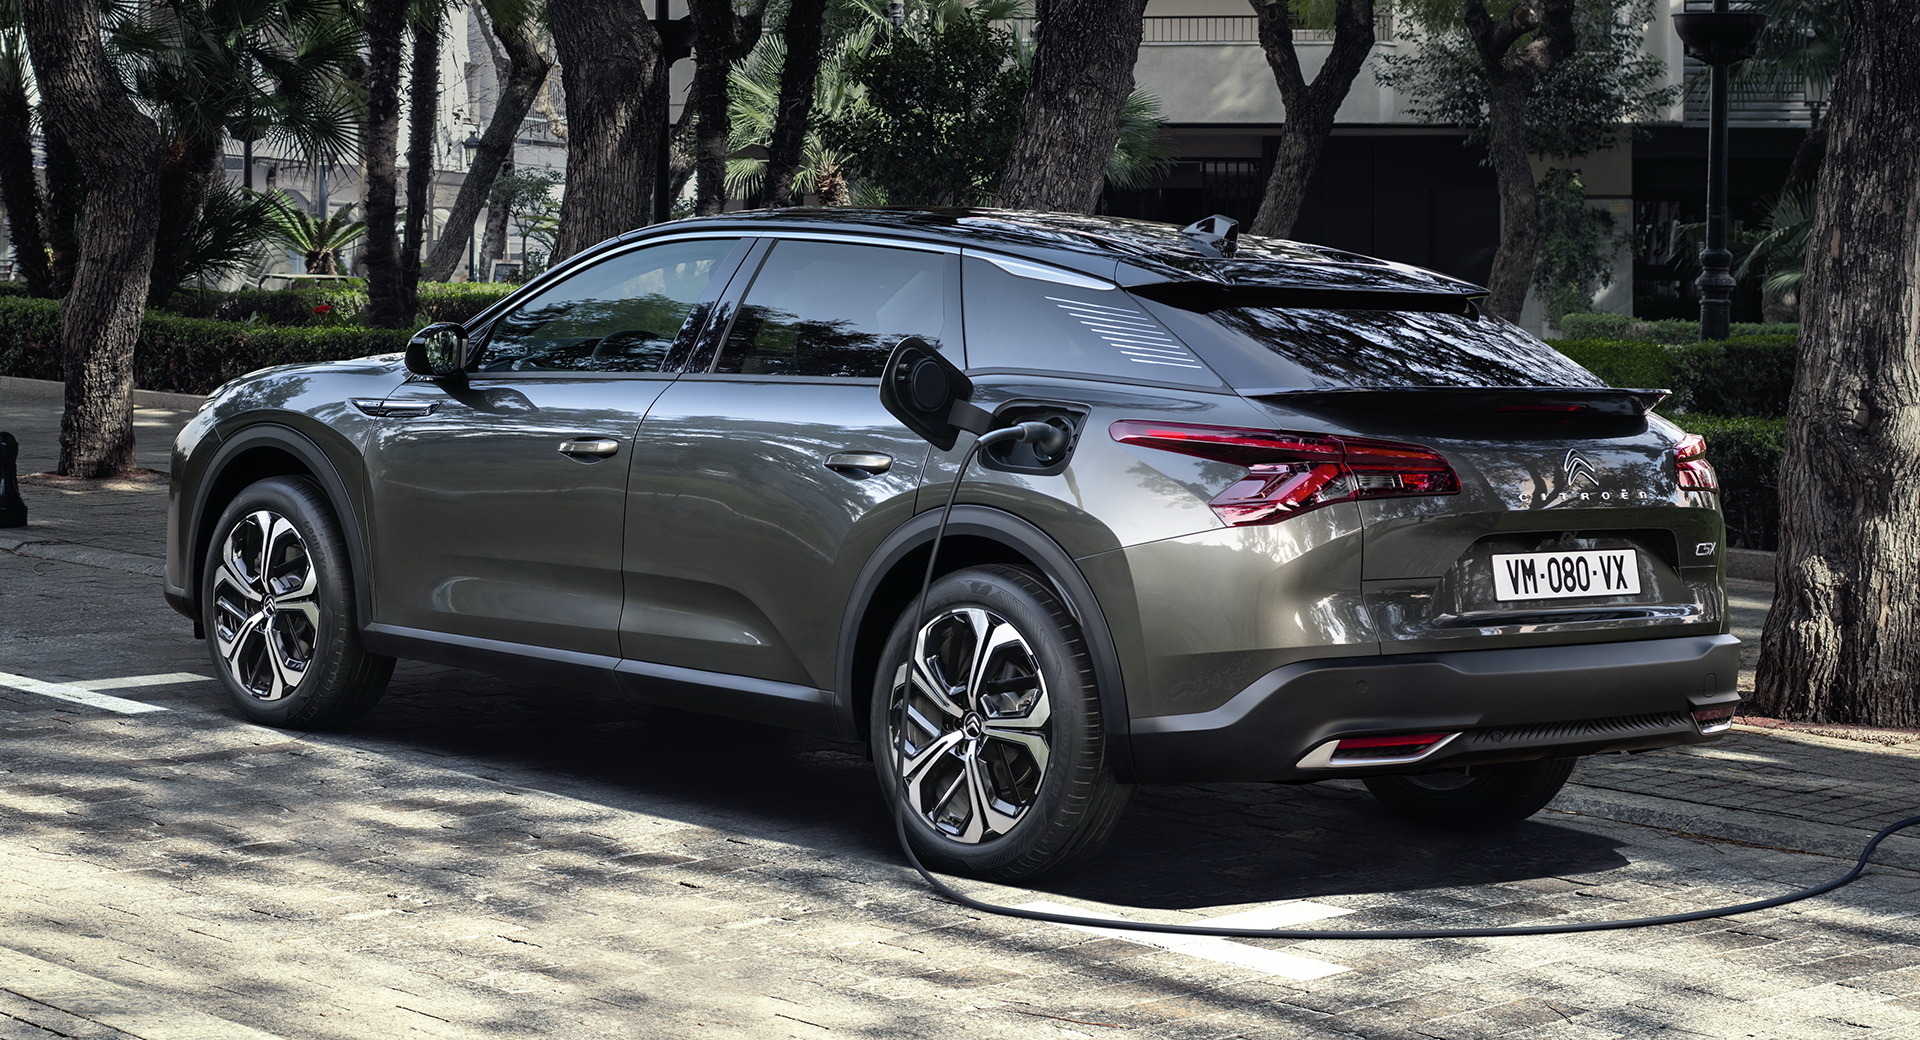 New Citroen C5 X Is A Comfort-Focused Flagship Walks Between Wagons And SUVs | Carscoops